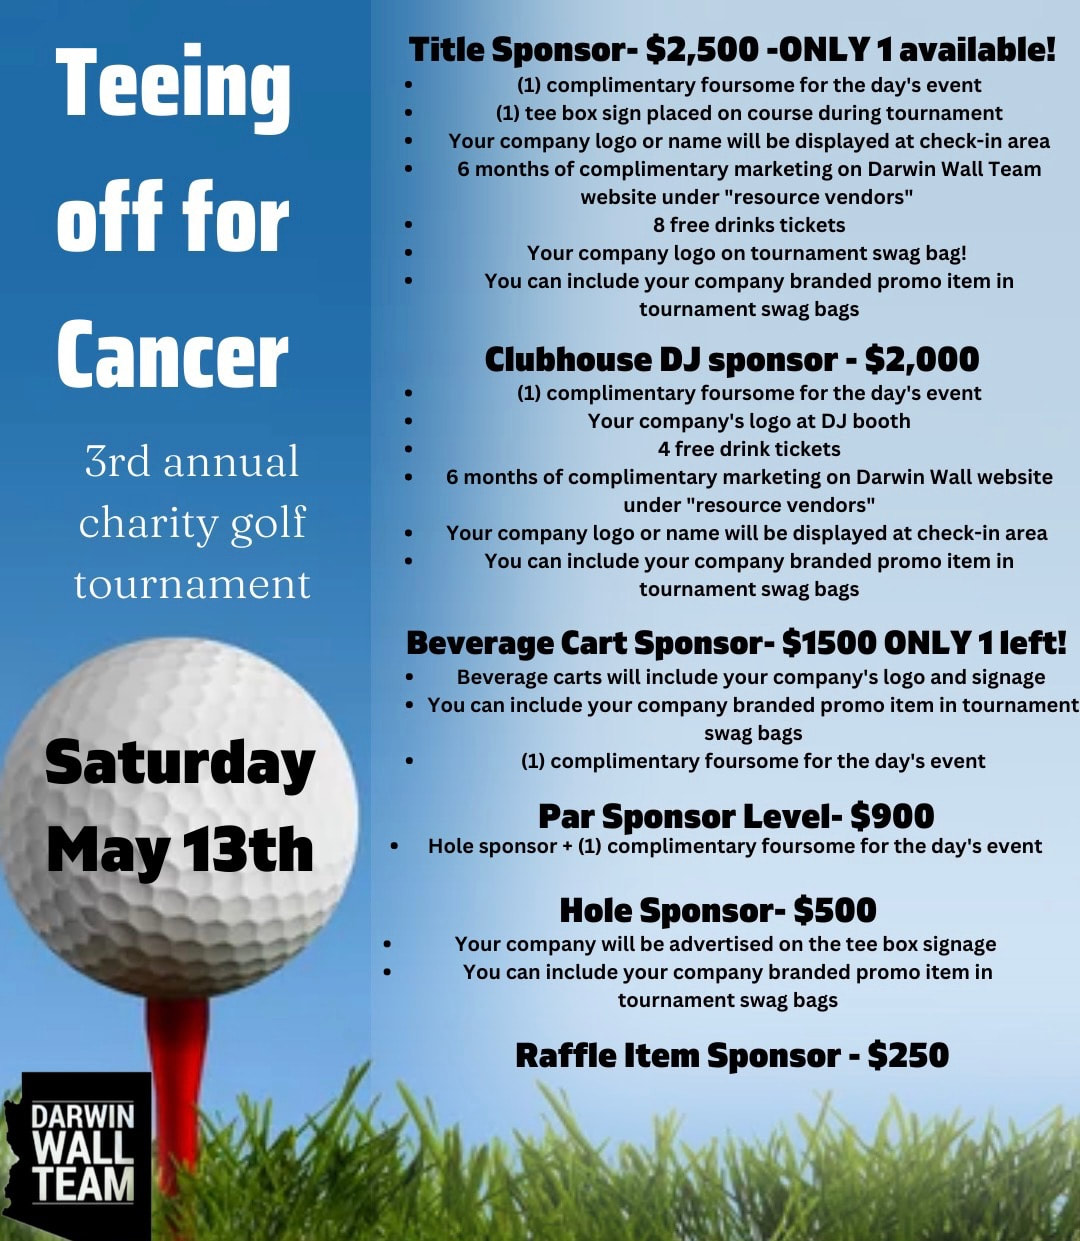 Teeing Off for Cancer